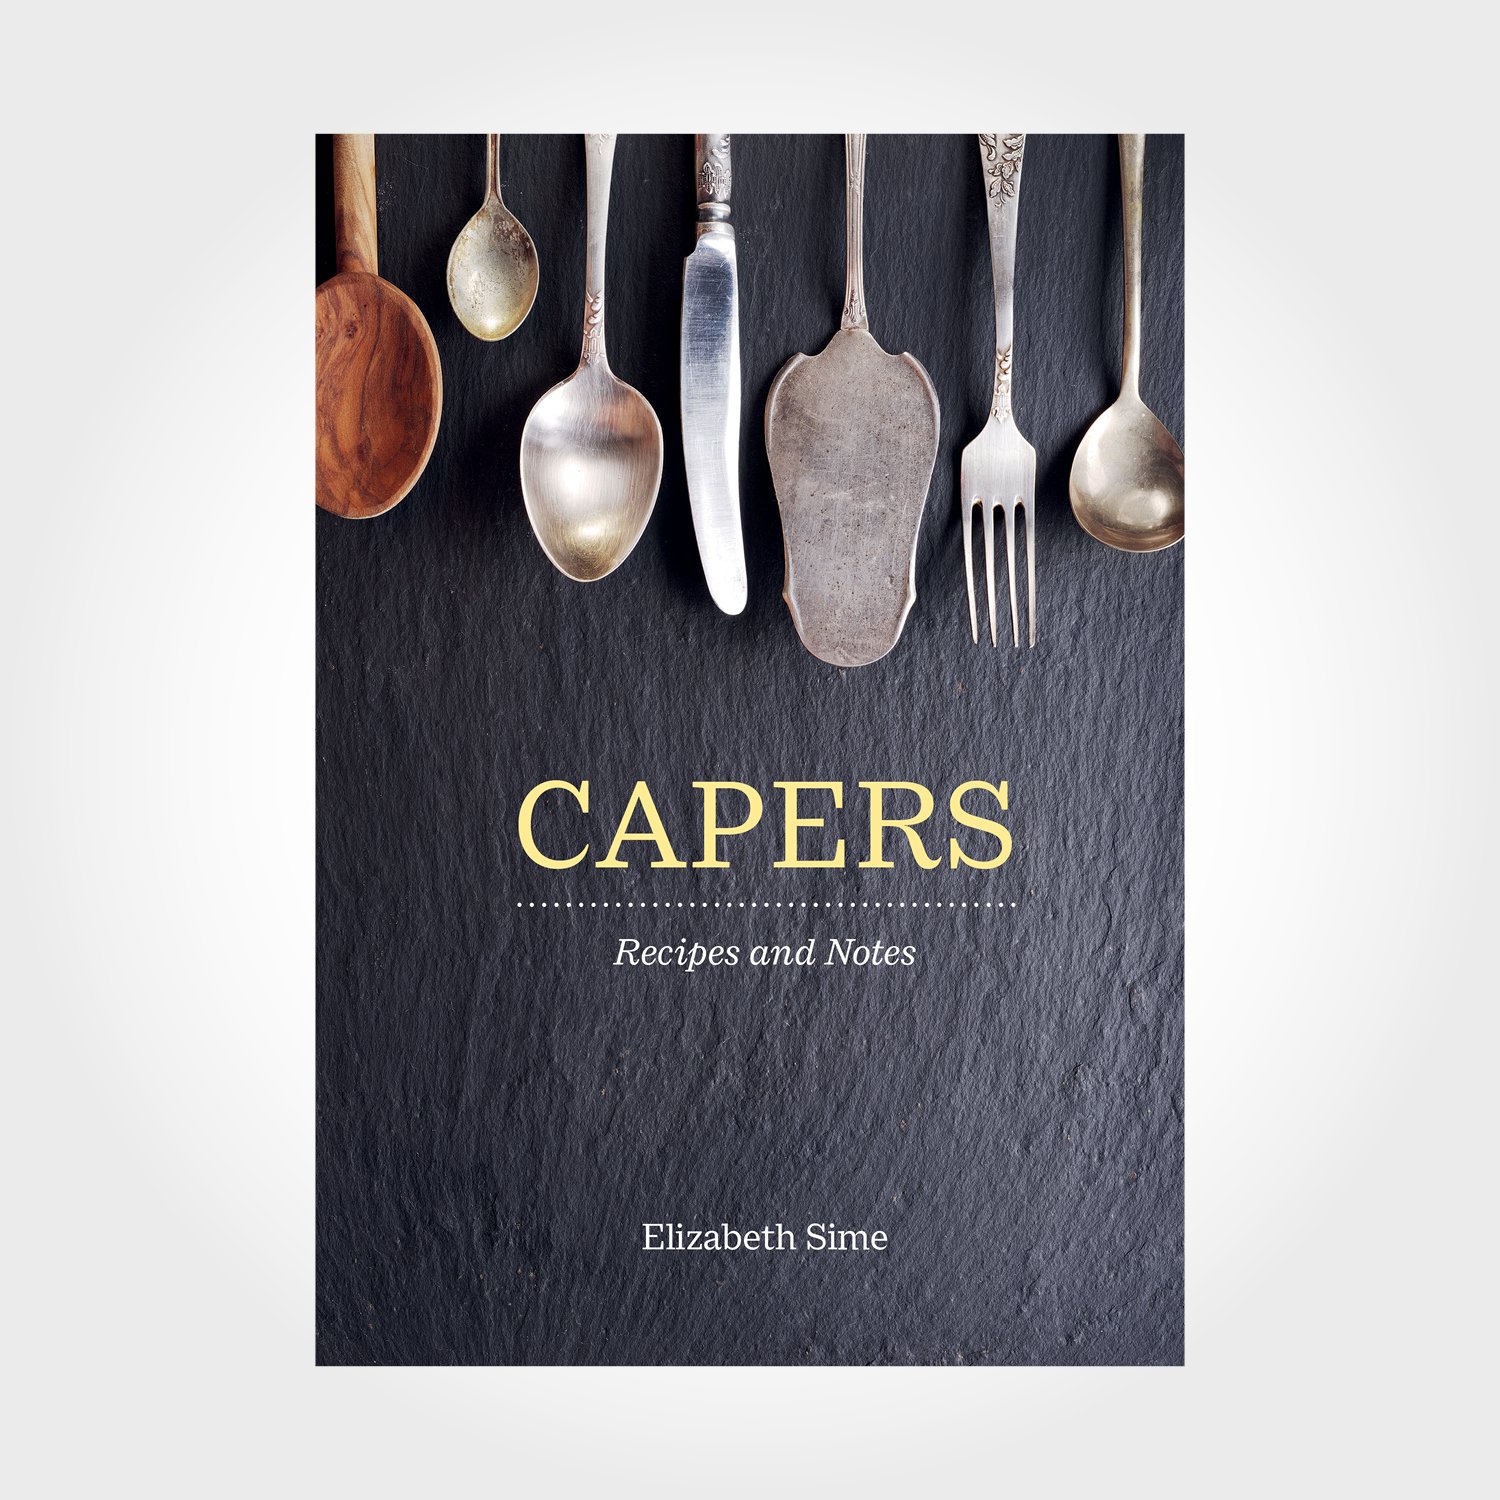 Capers: Recipes and Notes